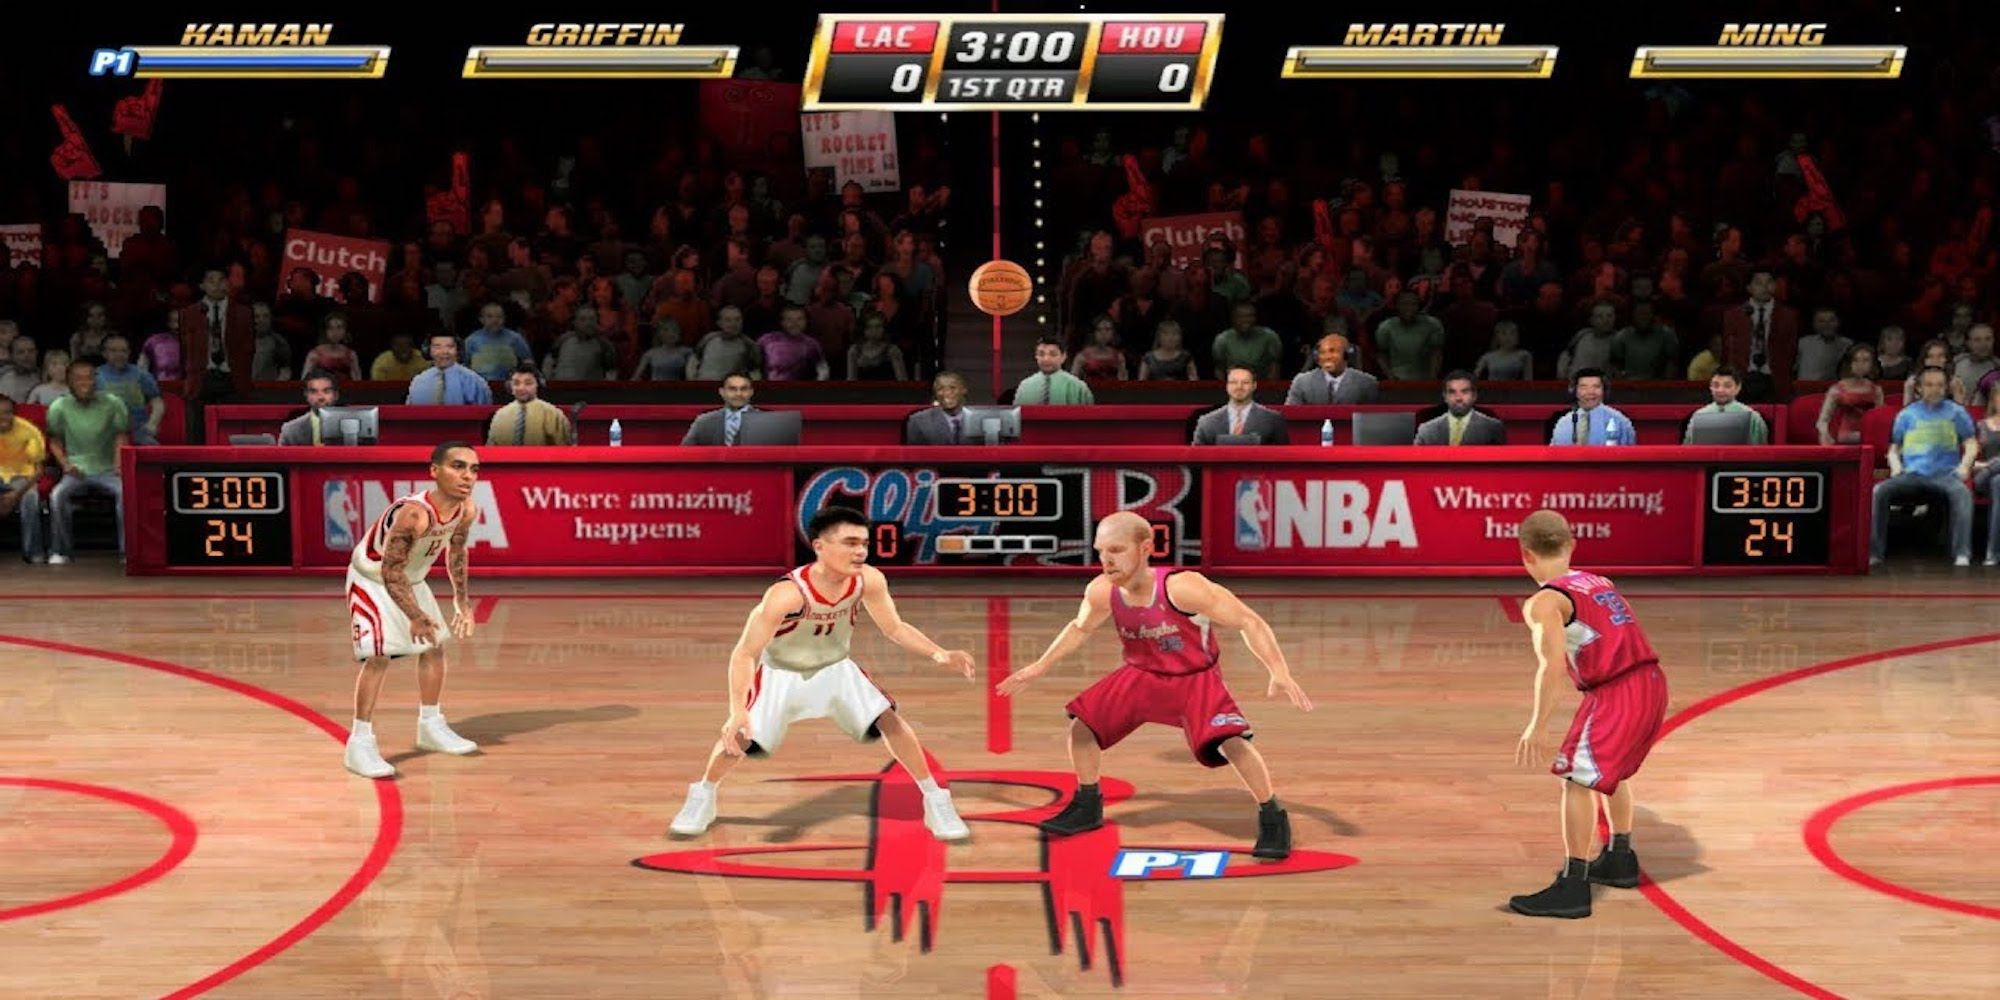 Playing a game in NBA Jam